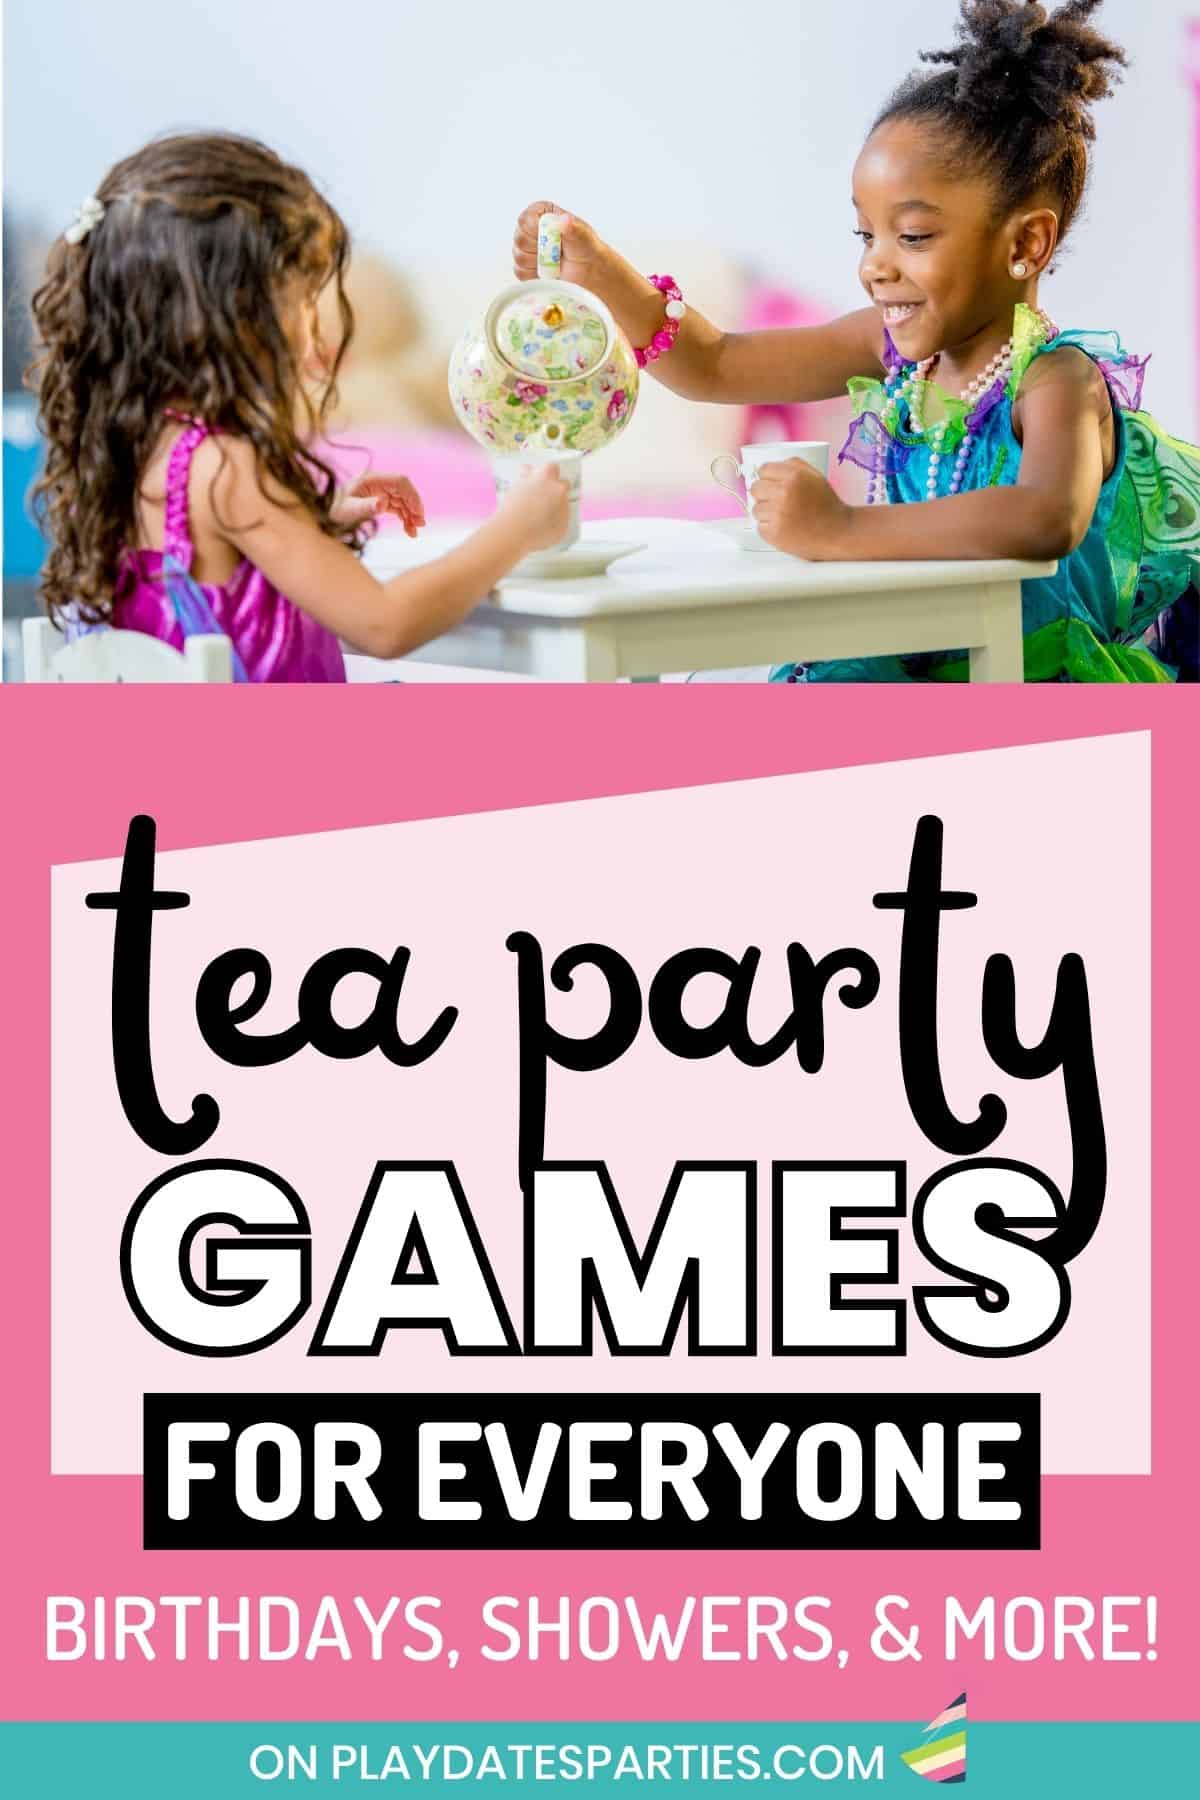 Graphic of two little girls having a tea party with text overlay tea party games for everyone birthdays, showers, and more.